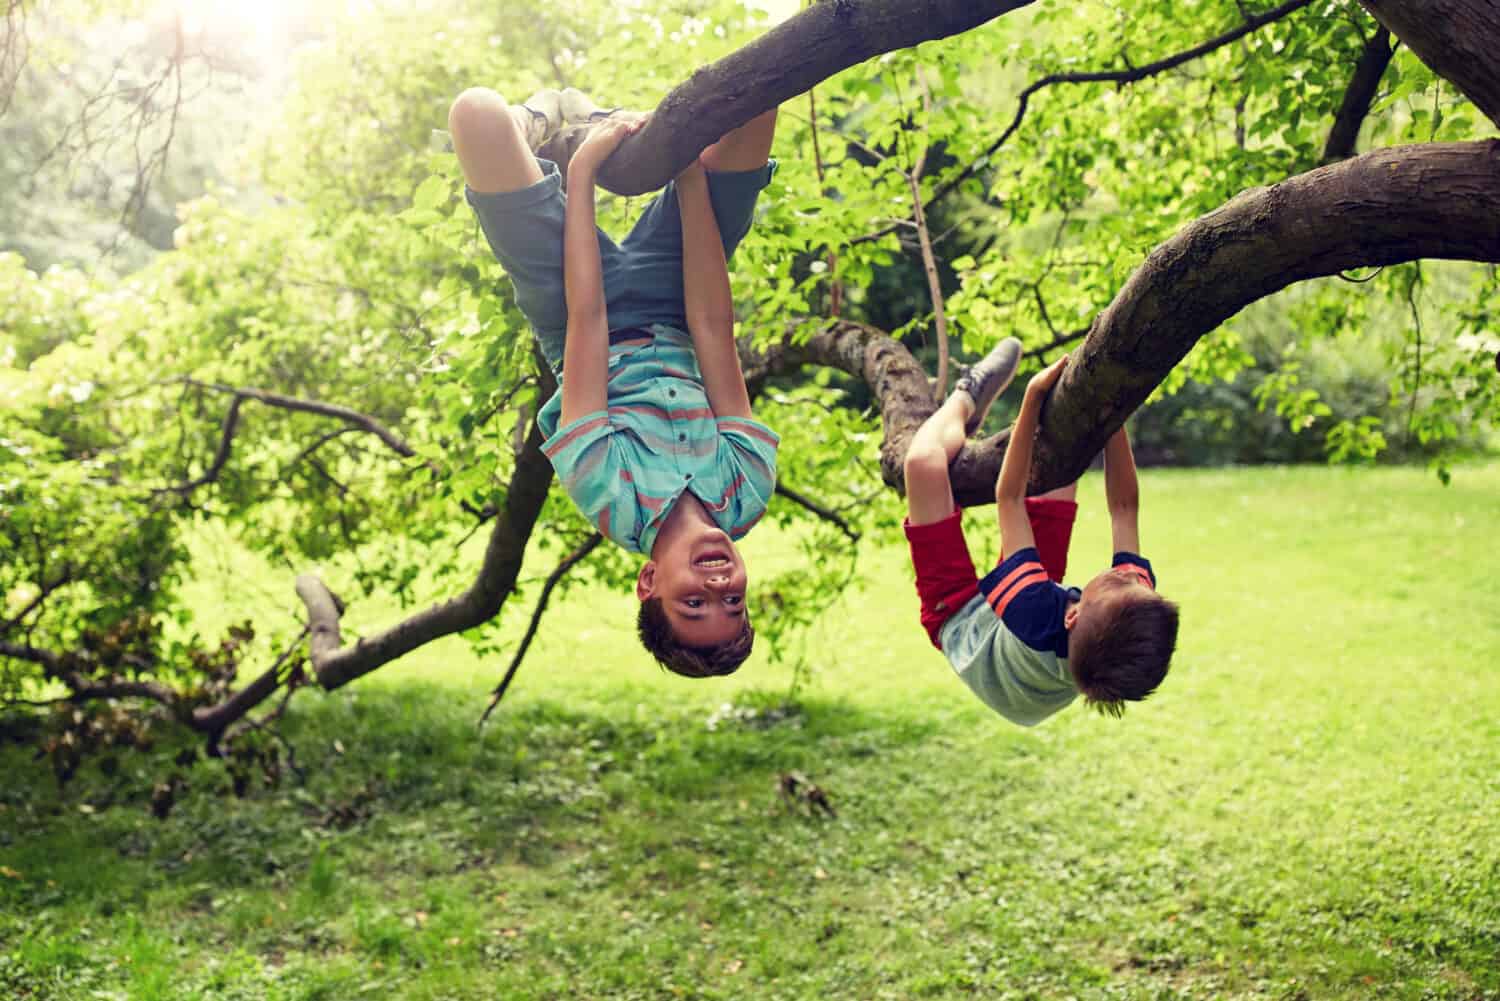 friendship, childhood, leisure and people concept - two happy kids or friends hanging upside down on tree and having fun in summer park